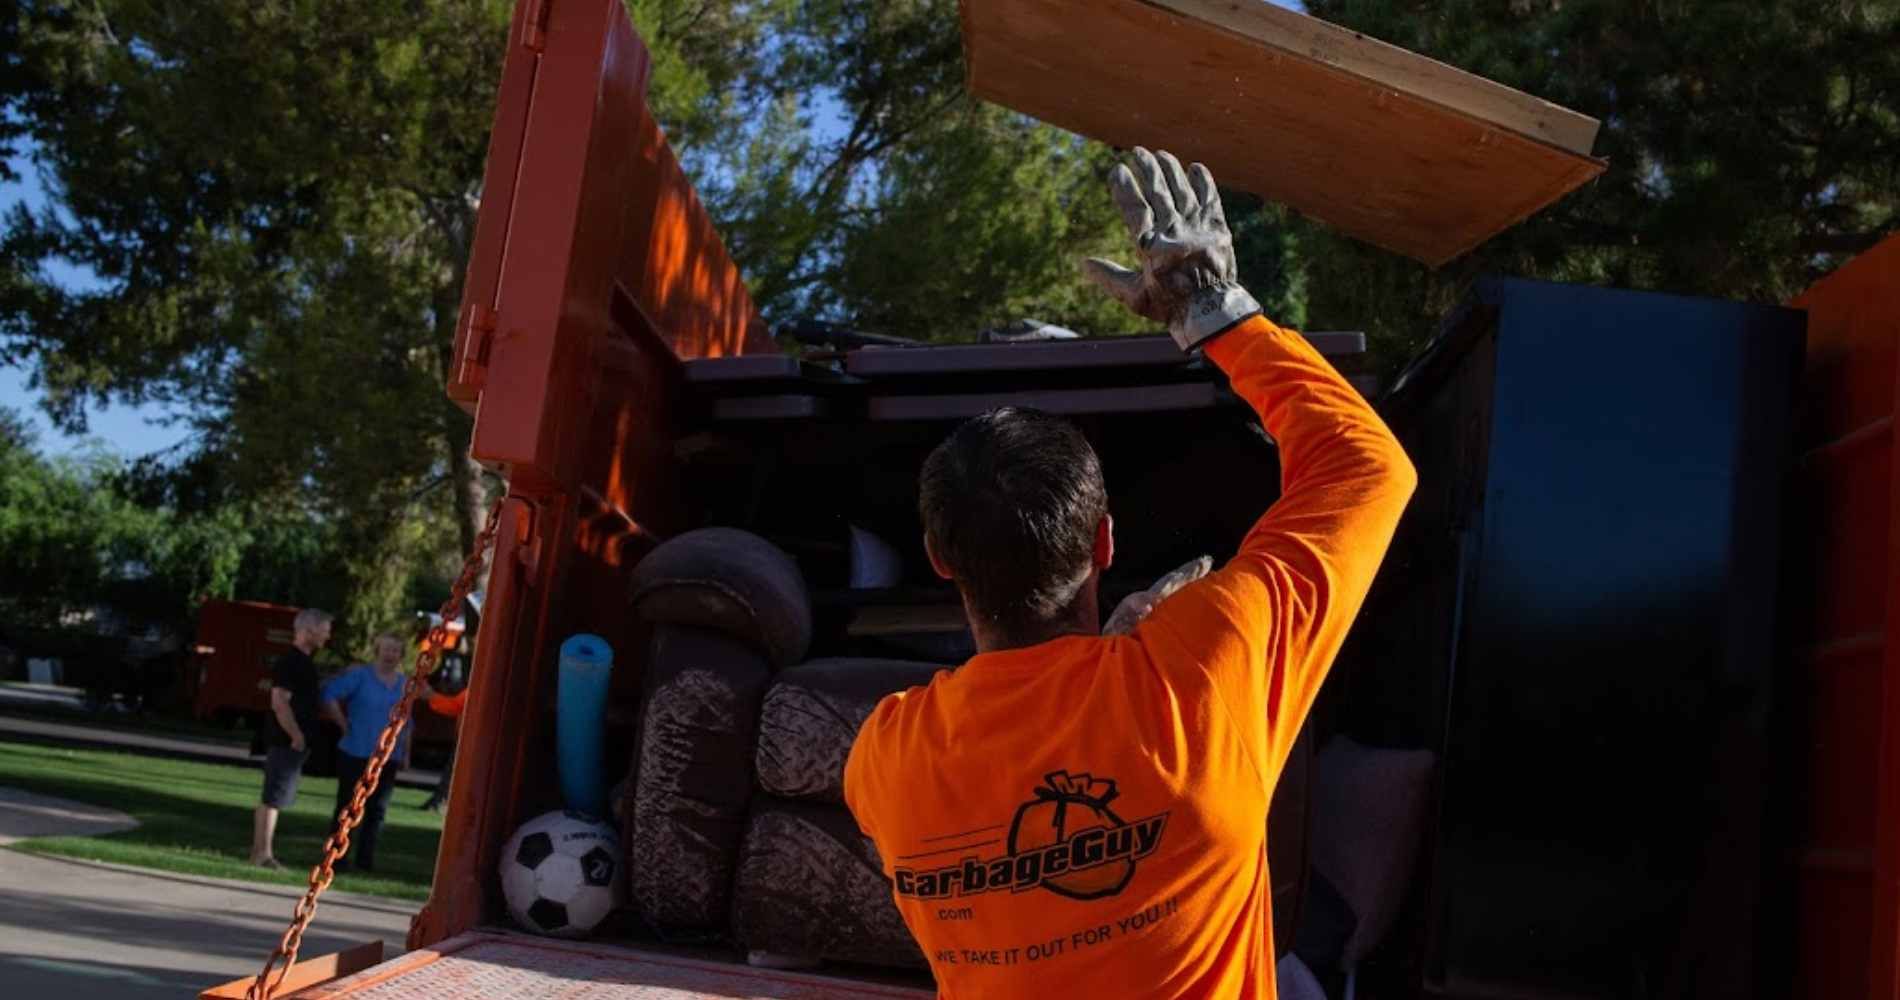 #1 for Eviction Cleanout in Phoenix, AZ with Over 1200 5-Star Reviews!